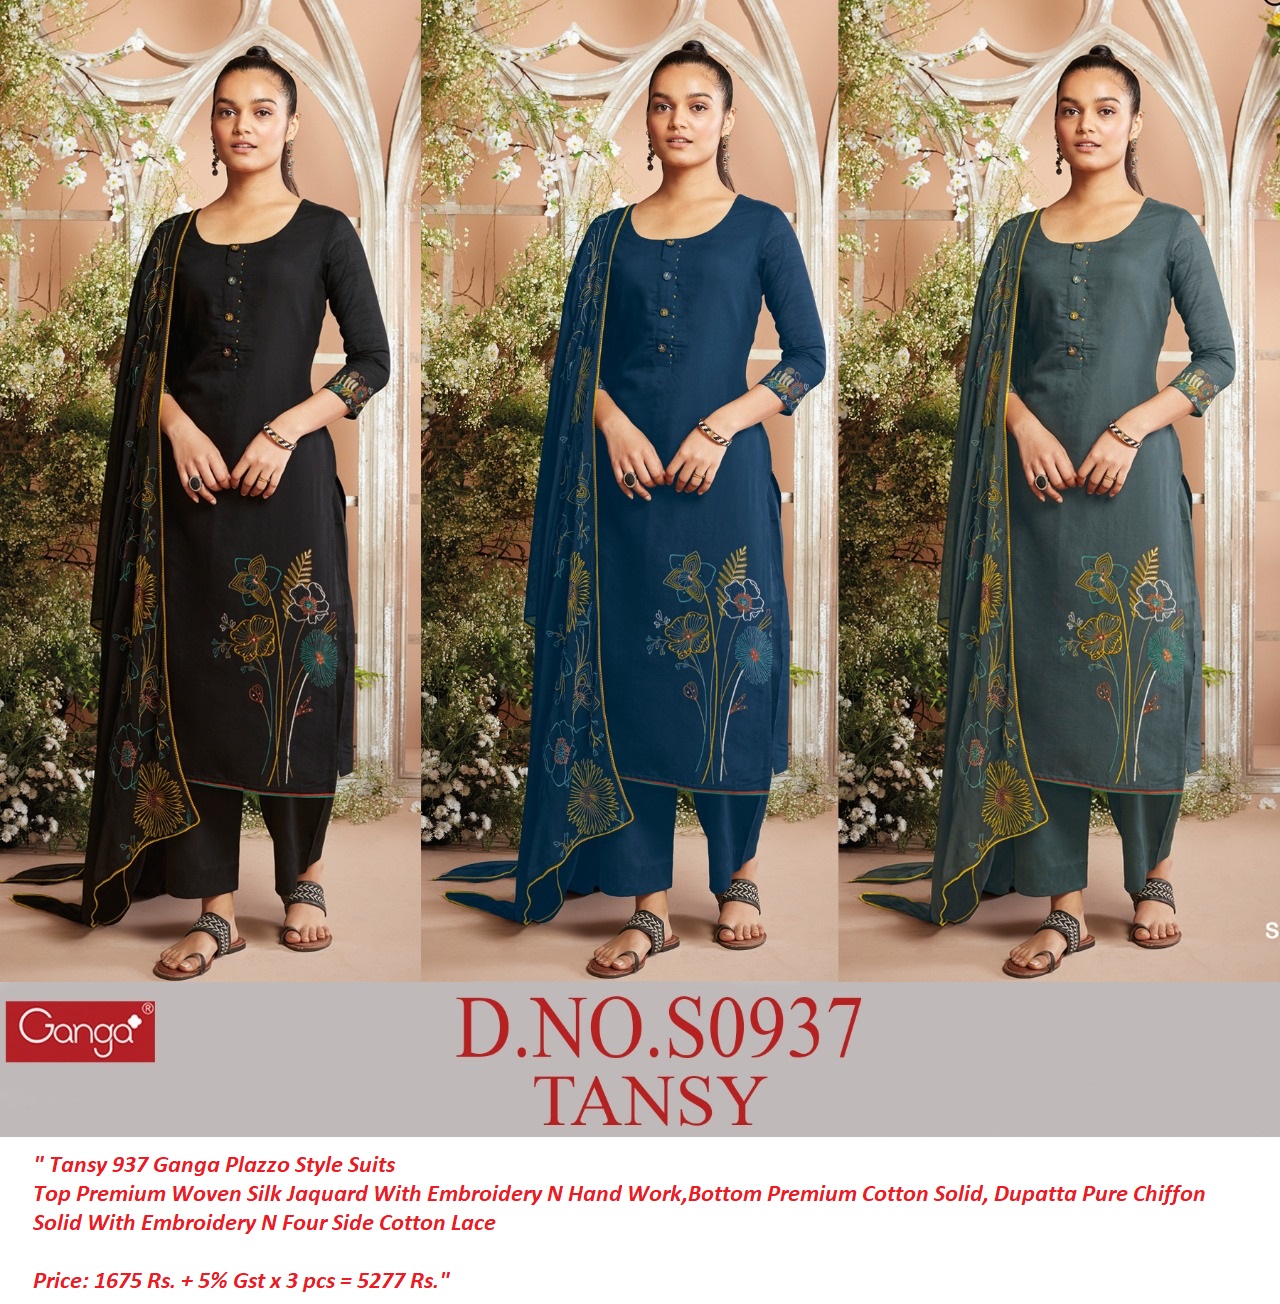 Tansy 937 Ganga Plazzo Style Suits Manufacturer Wholesaler